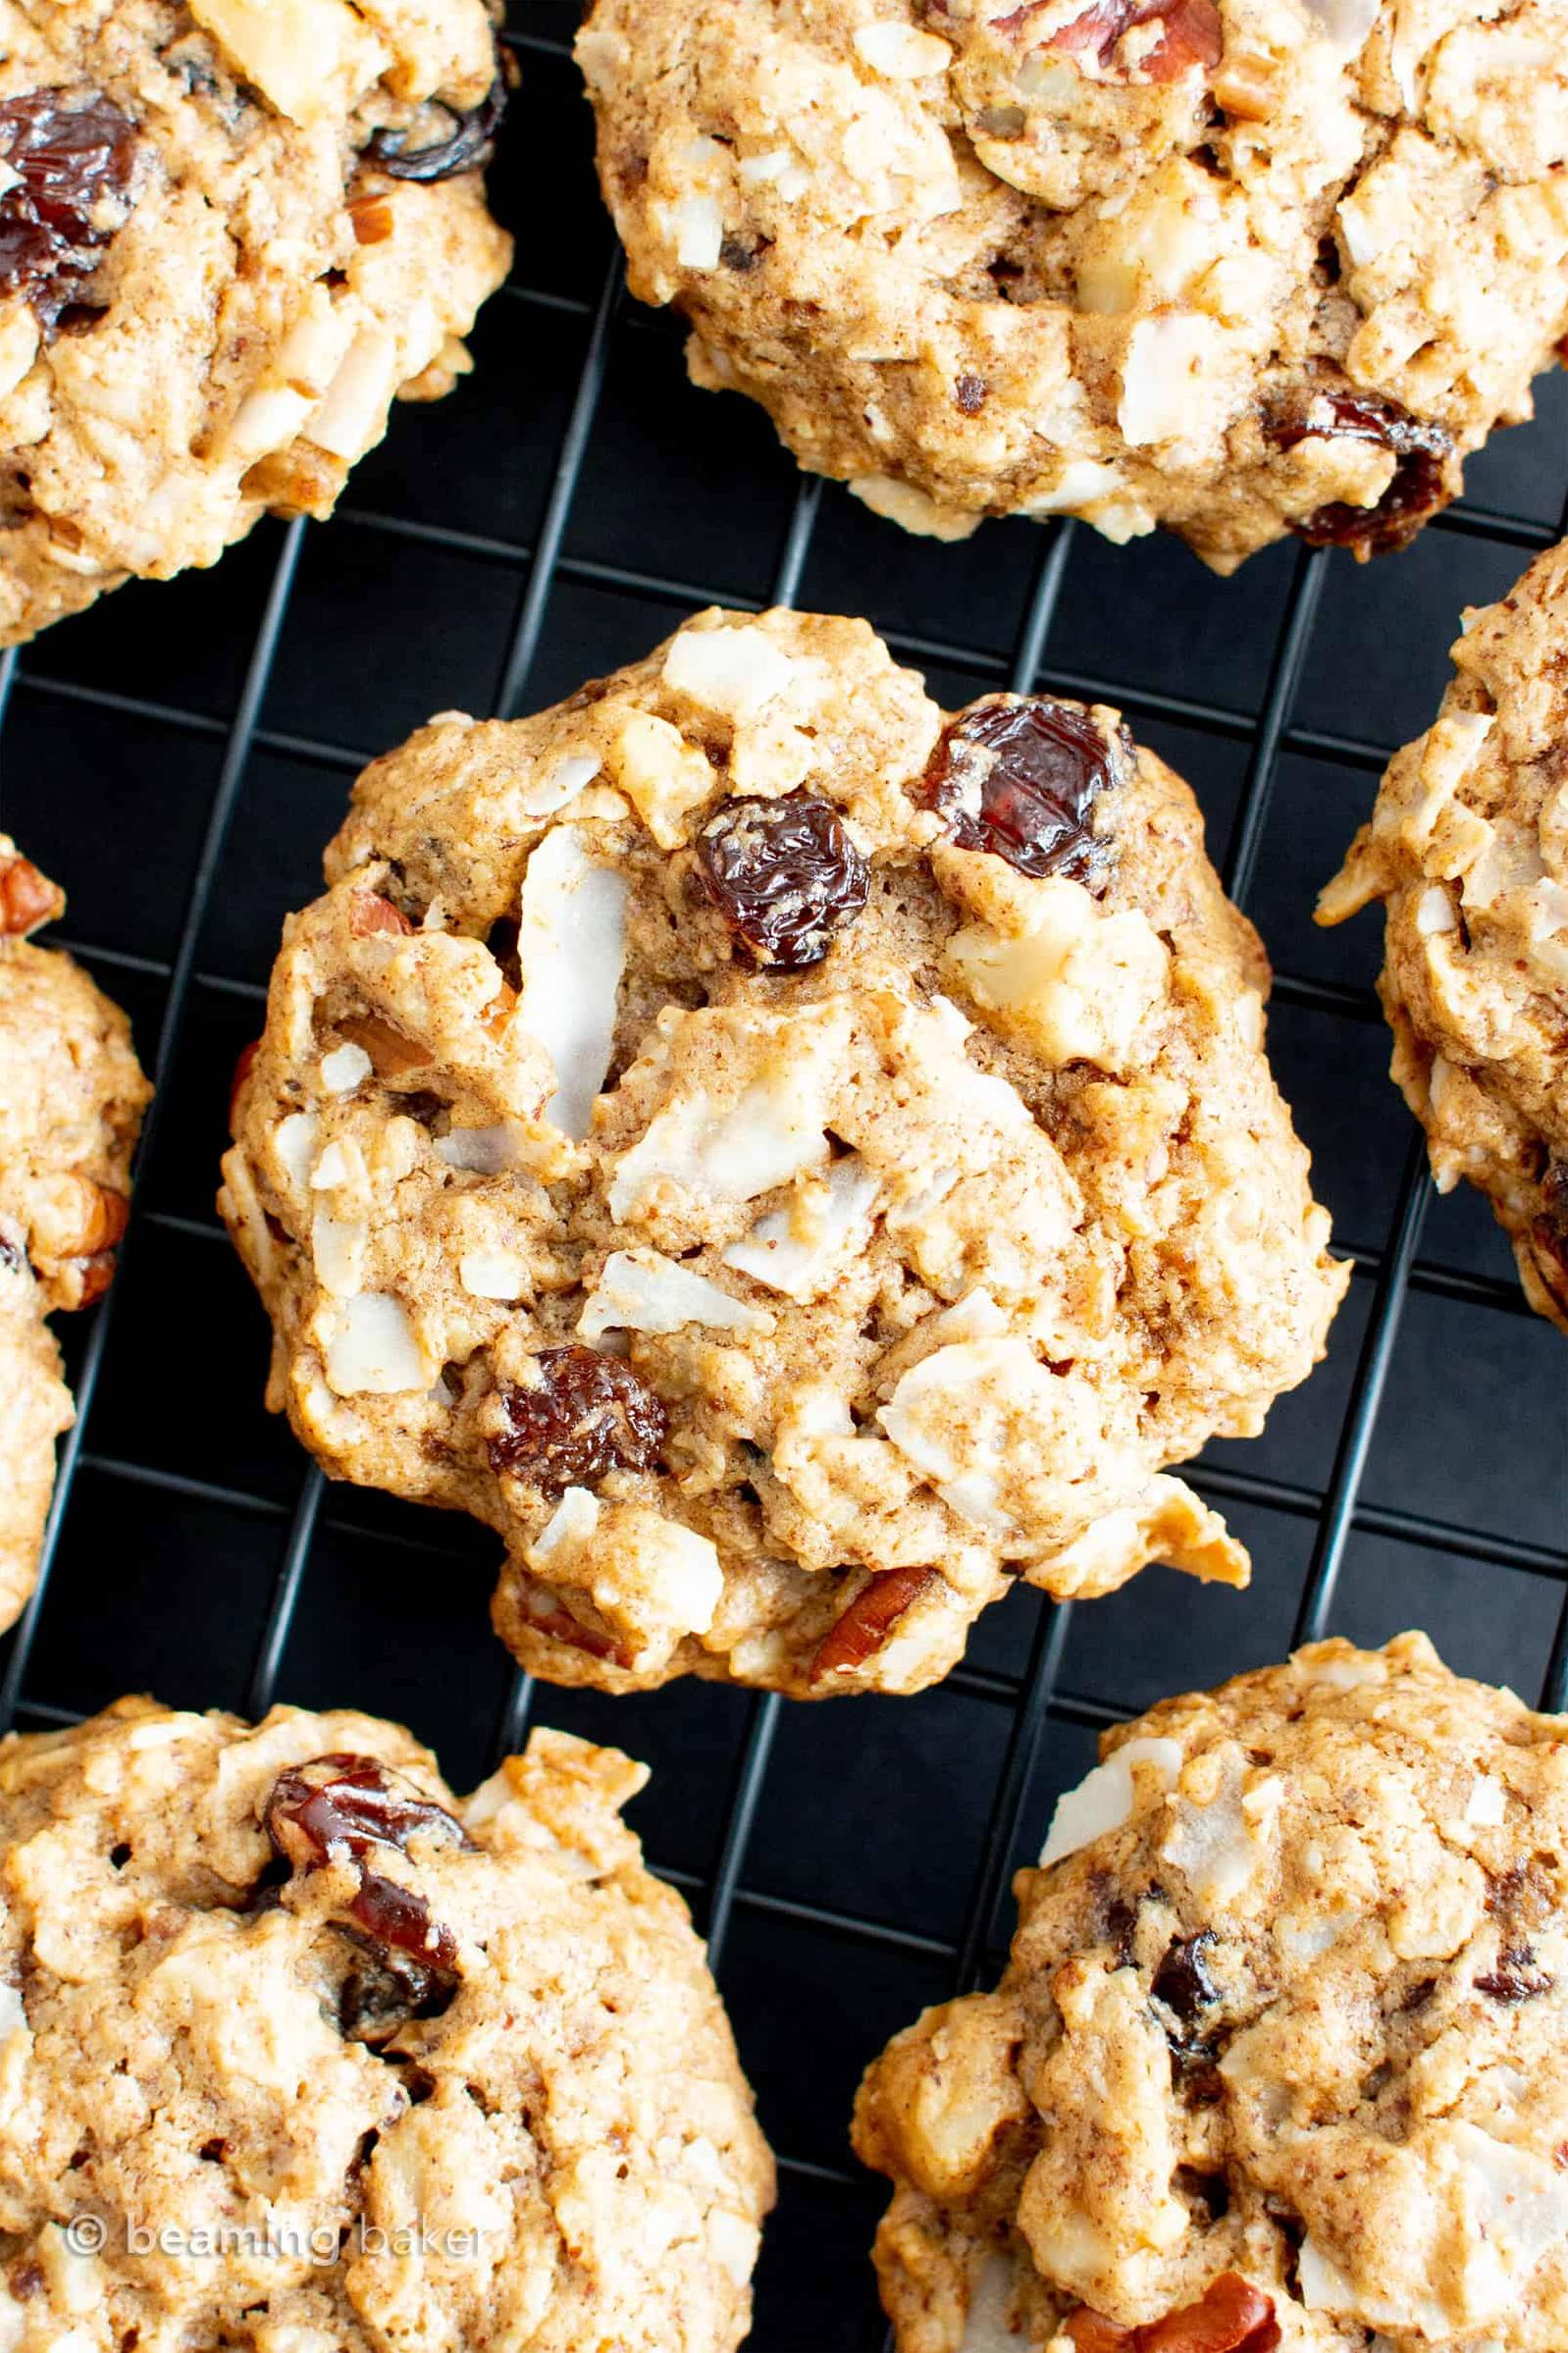  These cookies are perfect for a snack or a light breakfast.